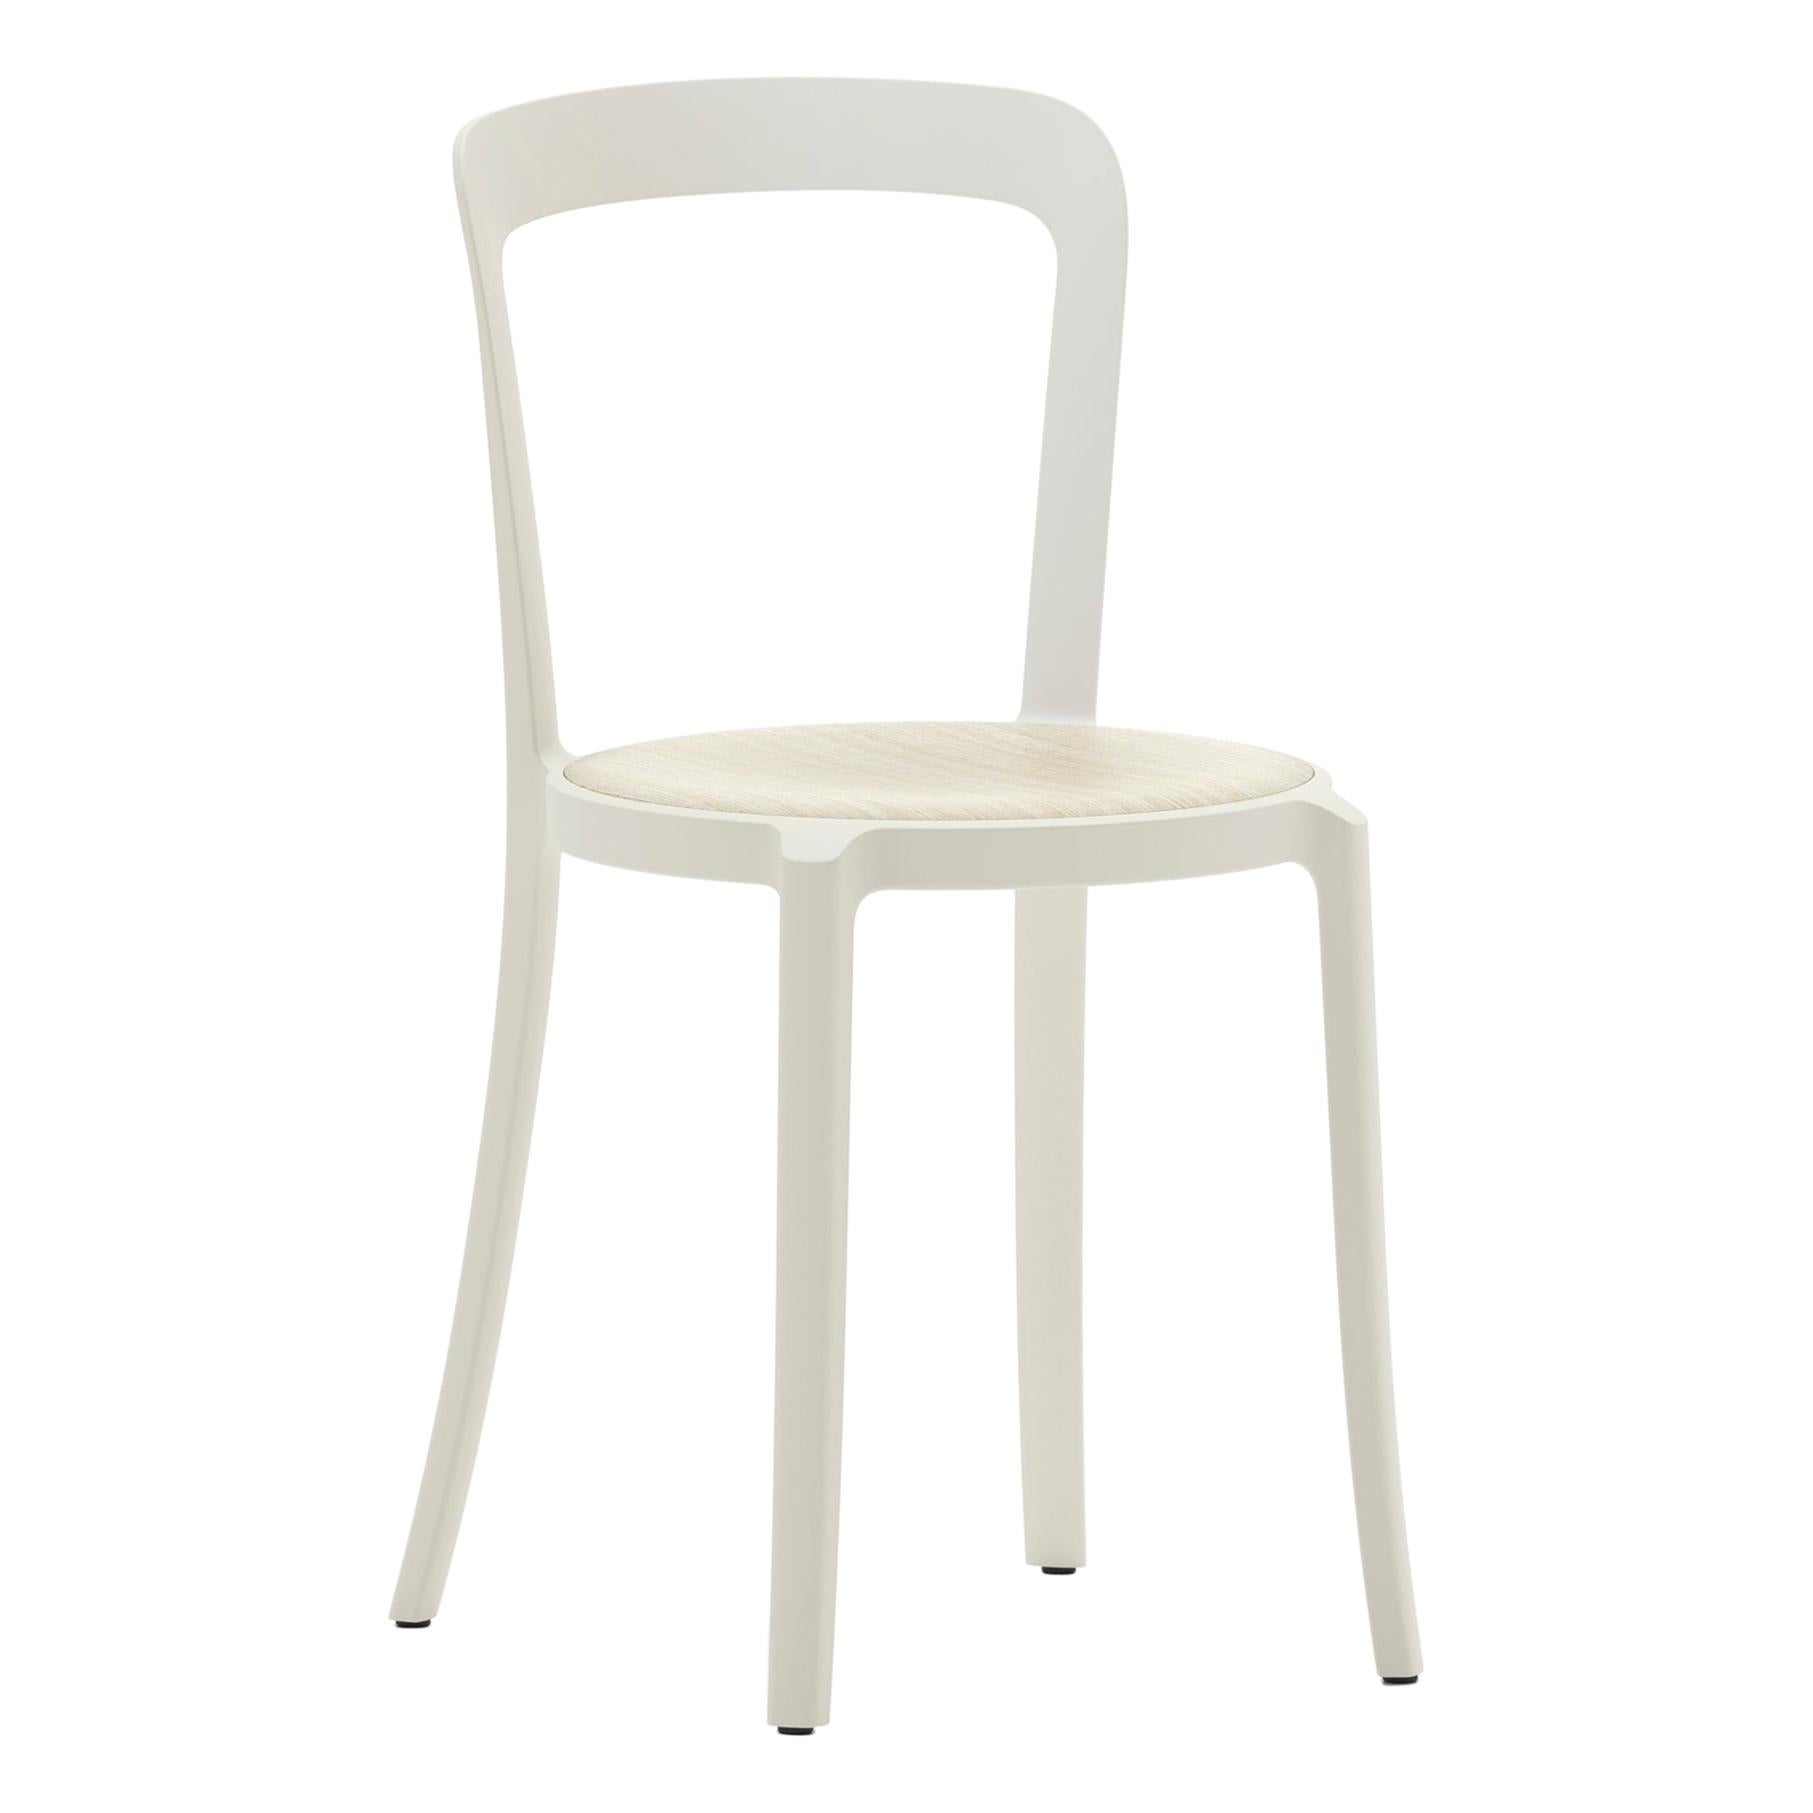 Emeco On & On Stacking Chair in White with Ash Plywood seat by Barber & Osgerby For Sale